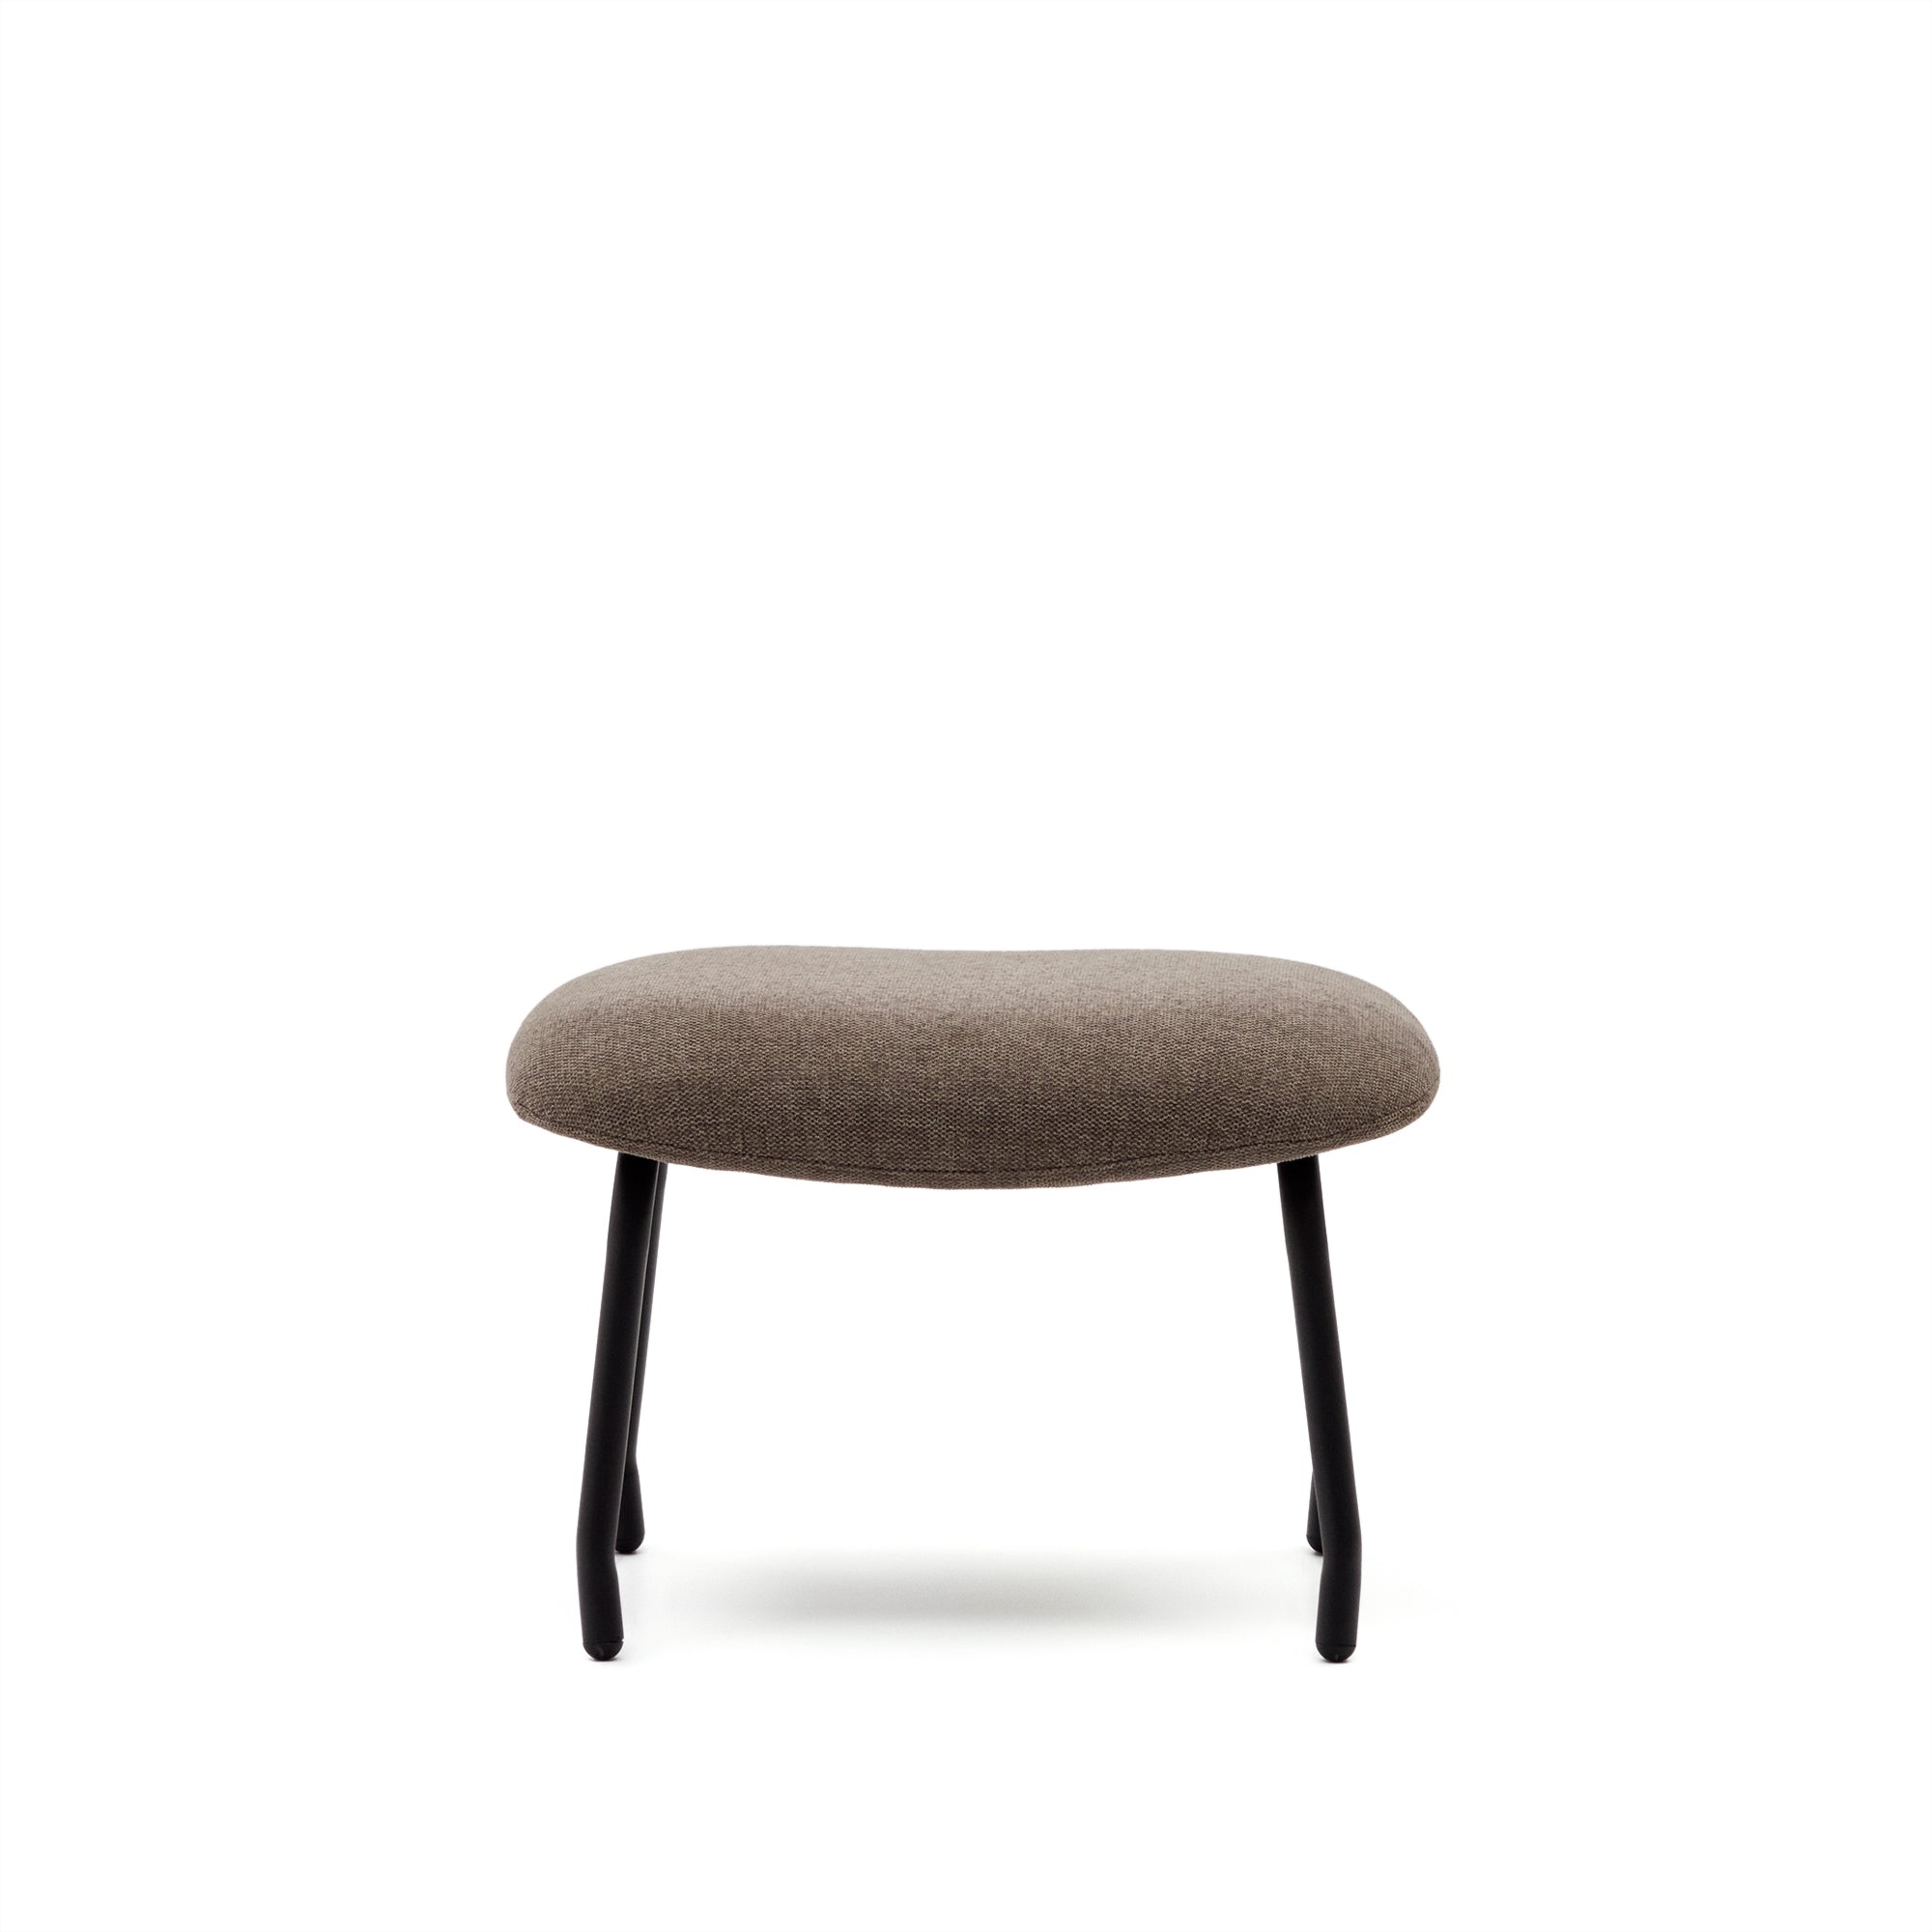 Belina footrest in light brown and steel with black finish